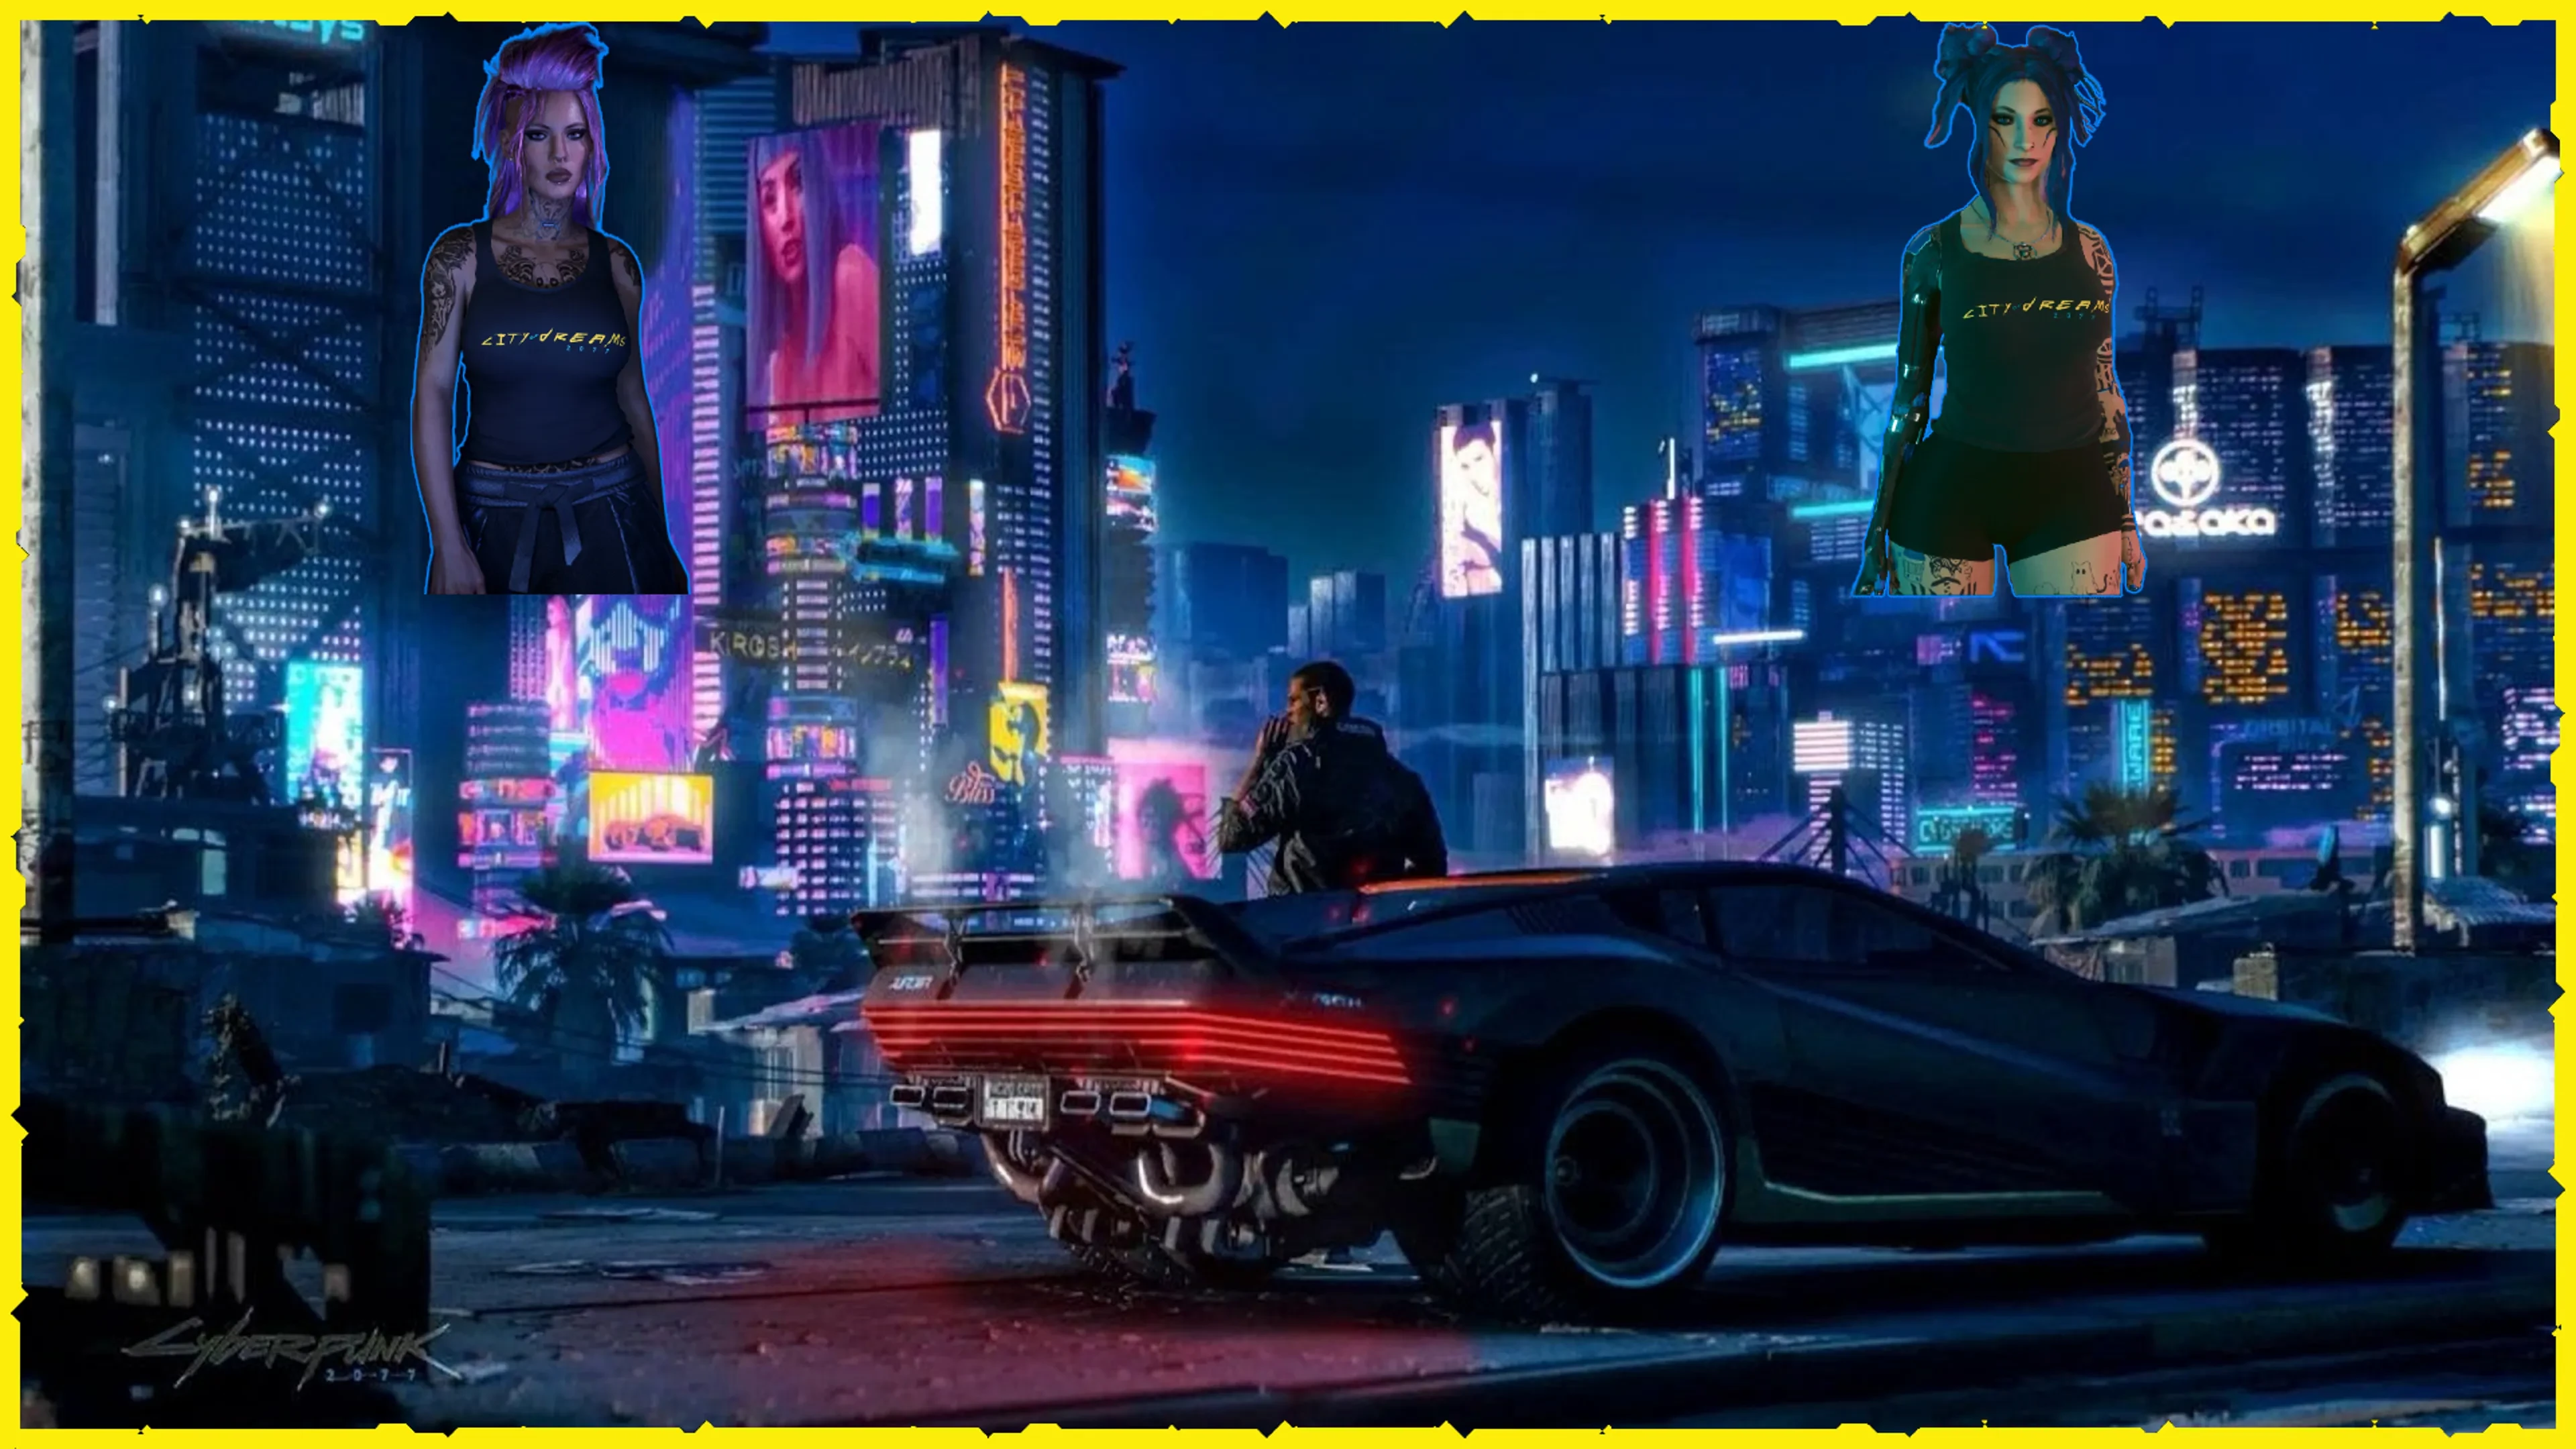 This Cyberpunk 2077 mod adds Edgerunners-inspired cyberpsychosis